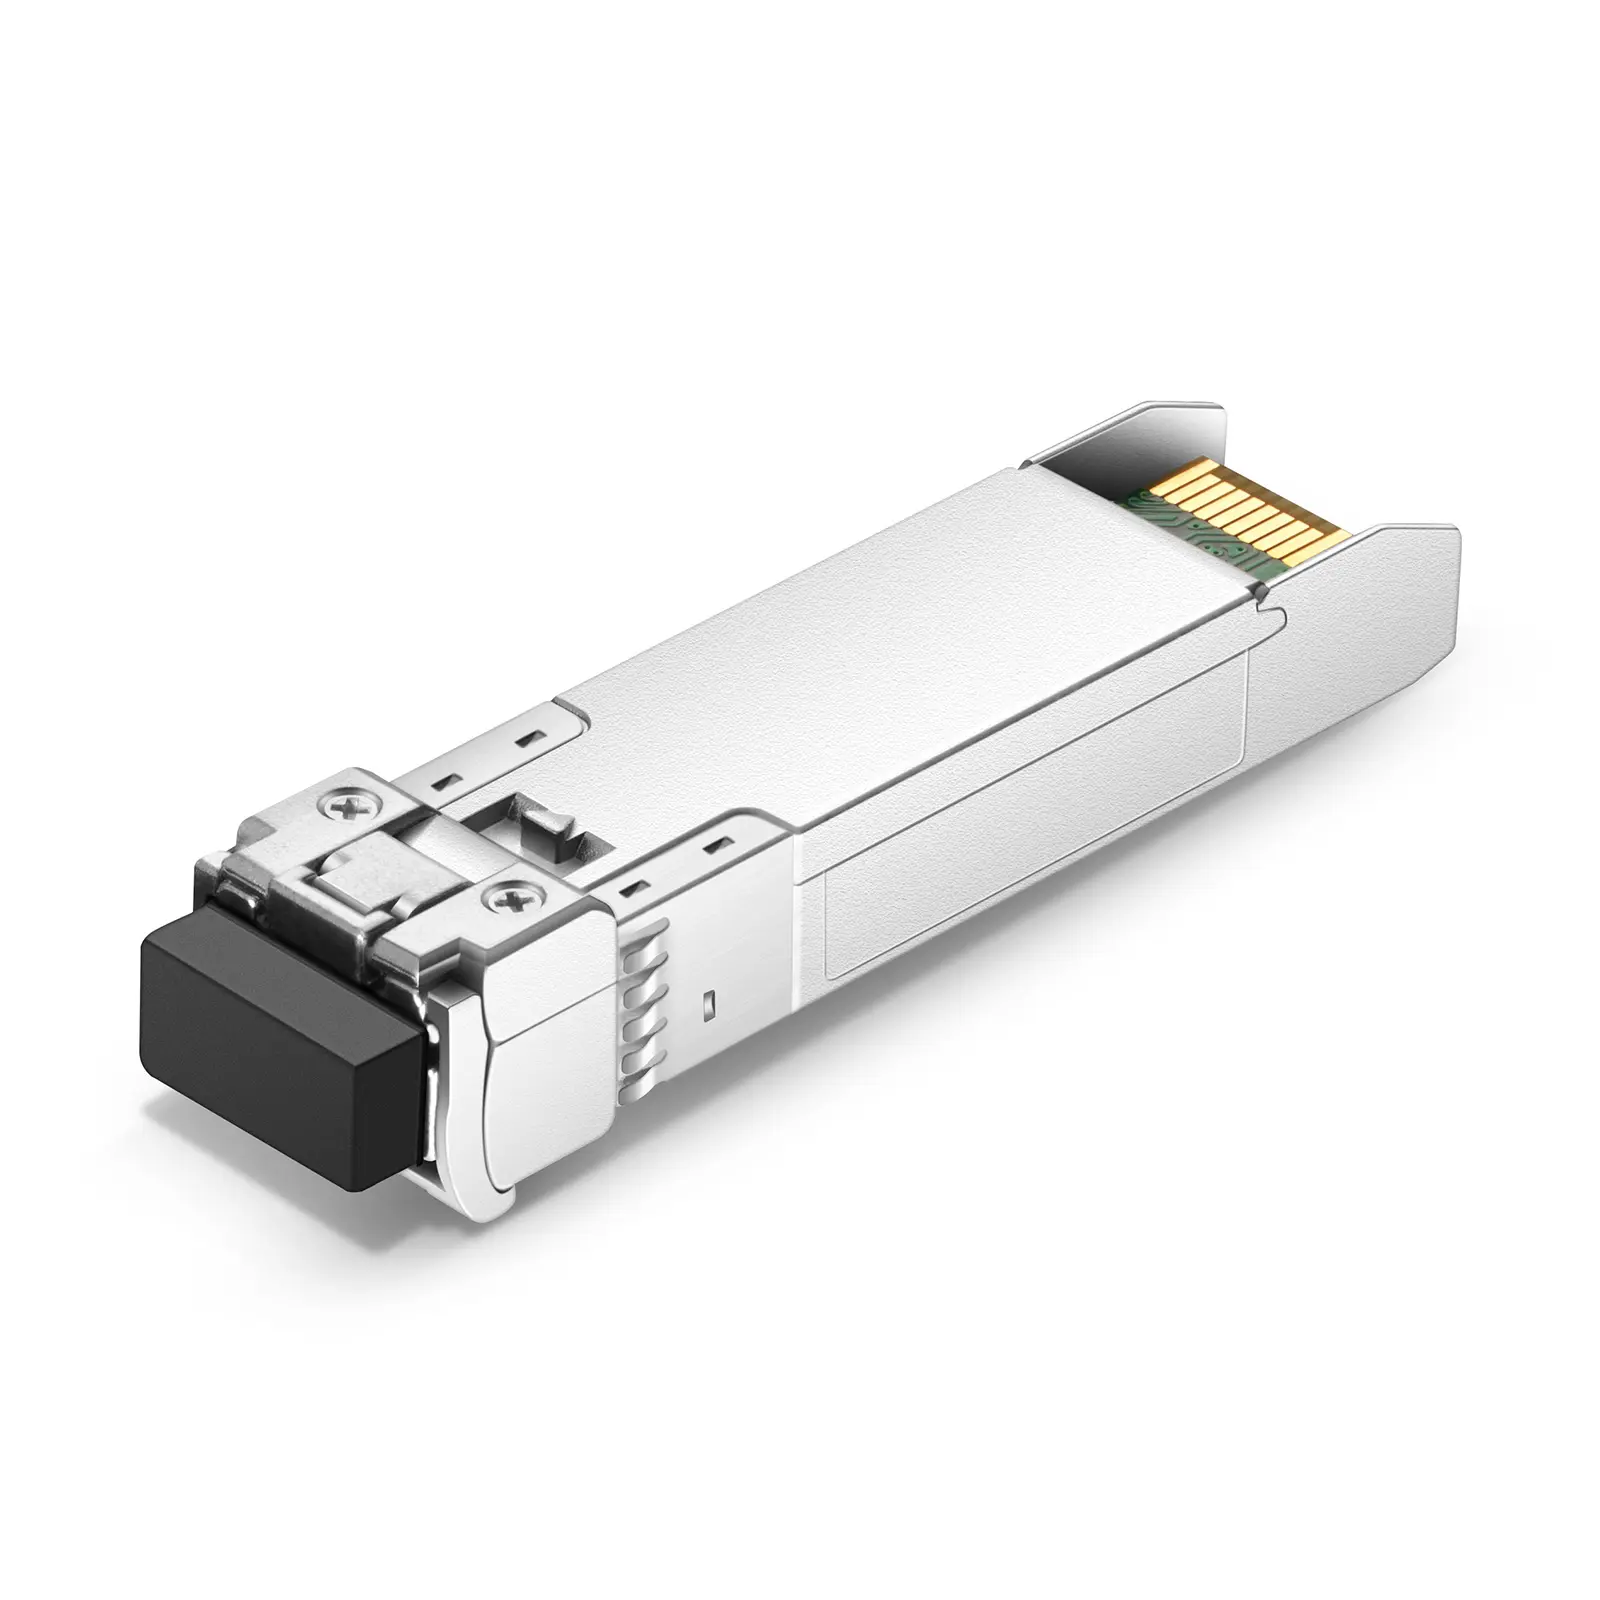 10g sfp module 10GBASE-LR SFP+ 1310nm 10km LC Transceiver Compatible for Alcatel-Lucent SFP-10G-LR/iSFP-10G-LR/3HE04823AA